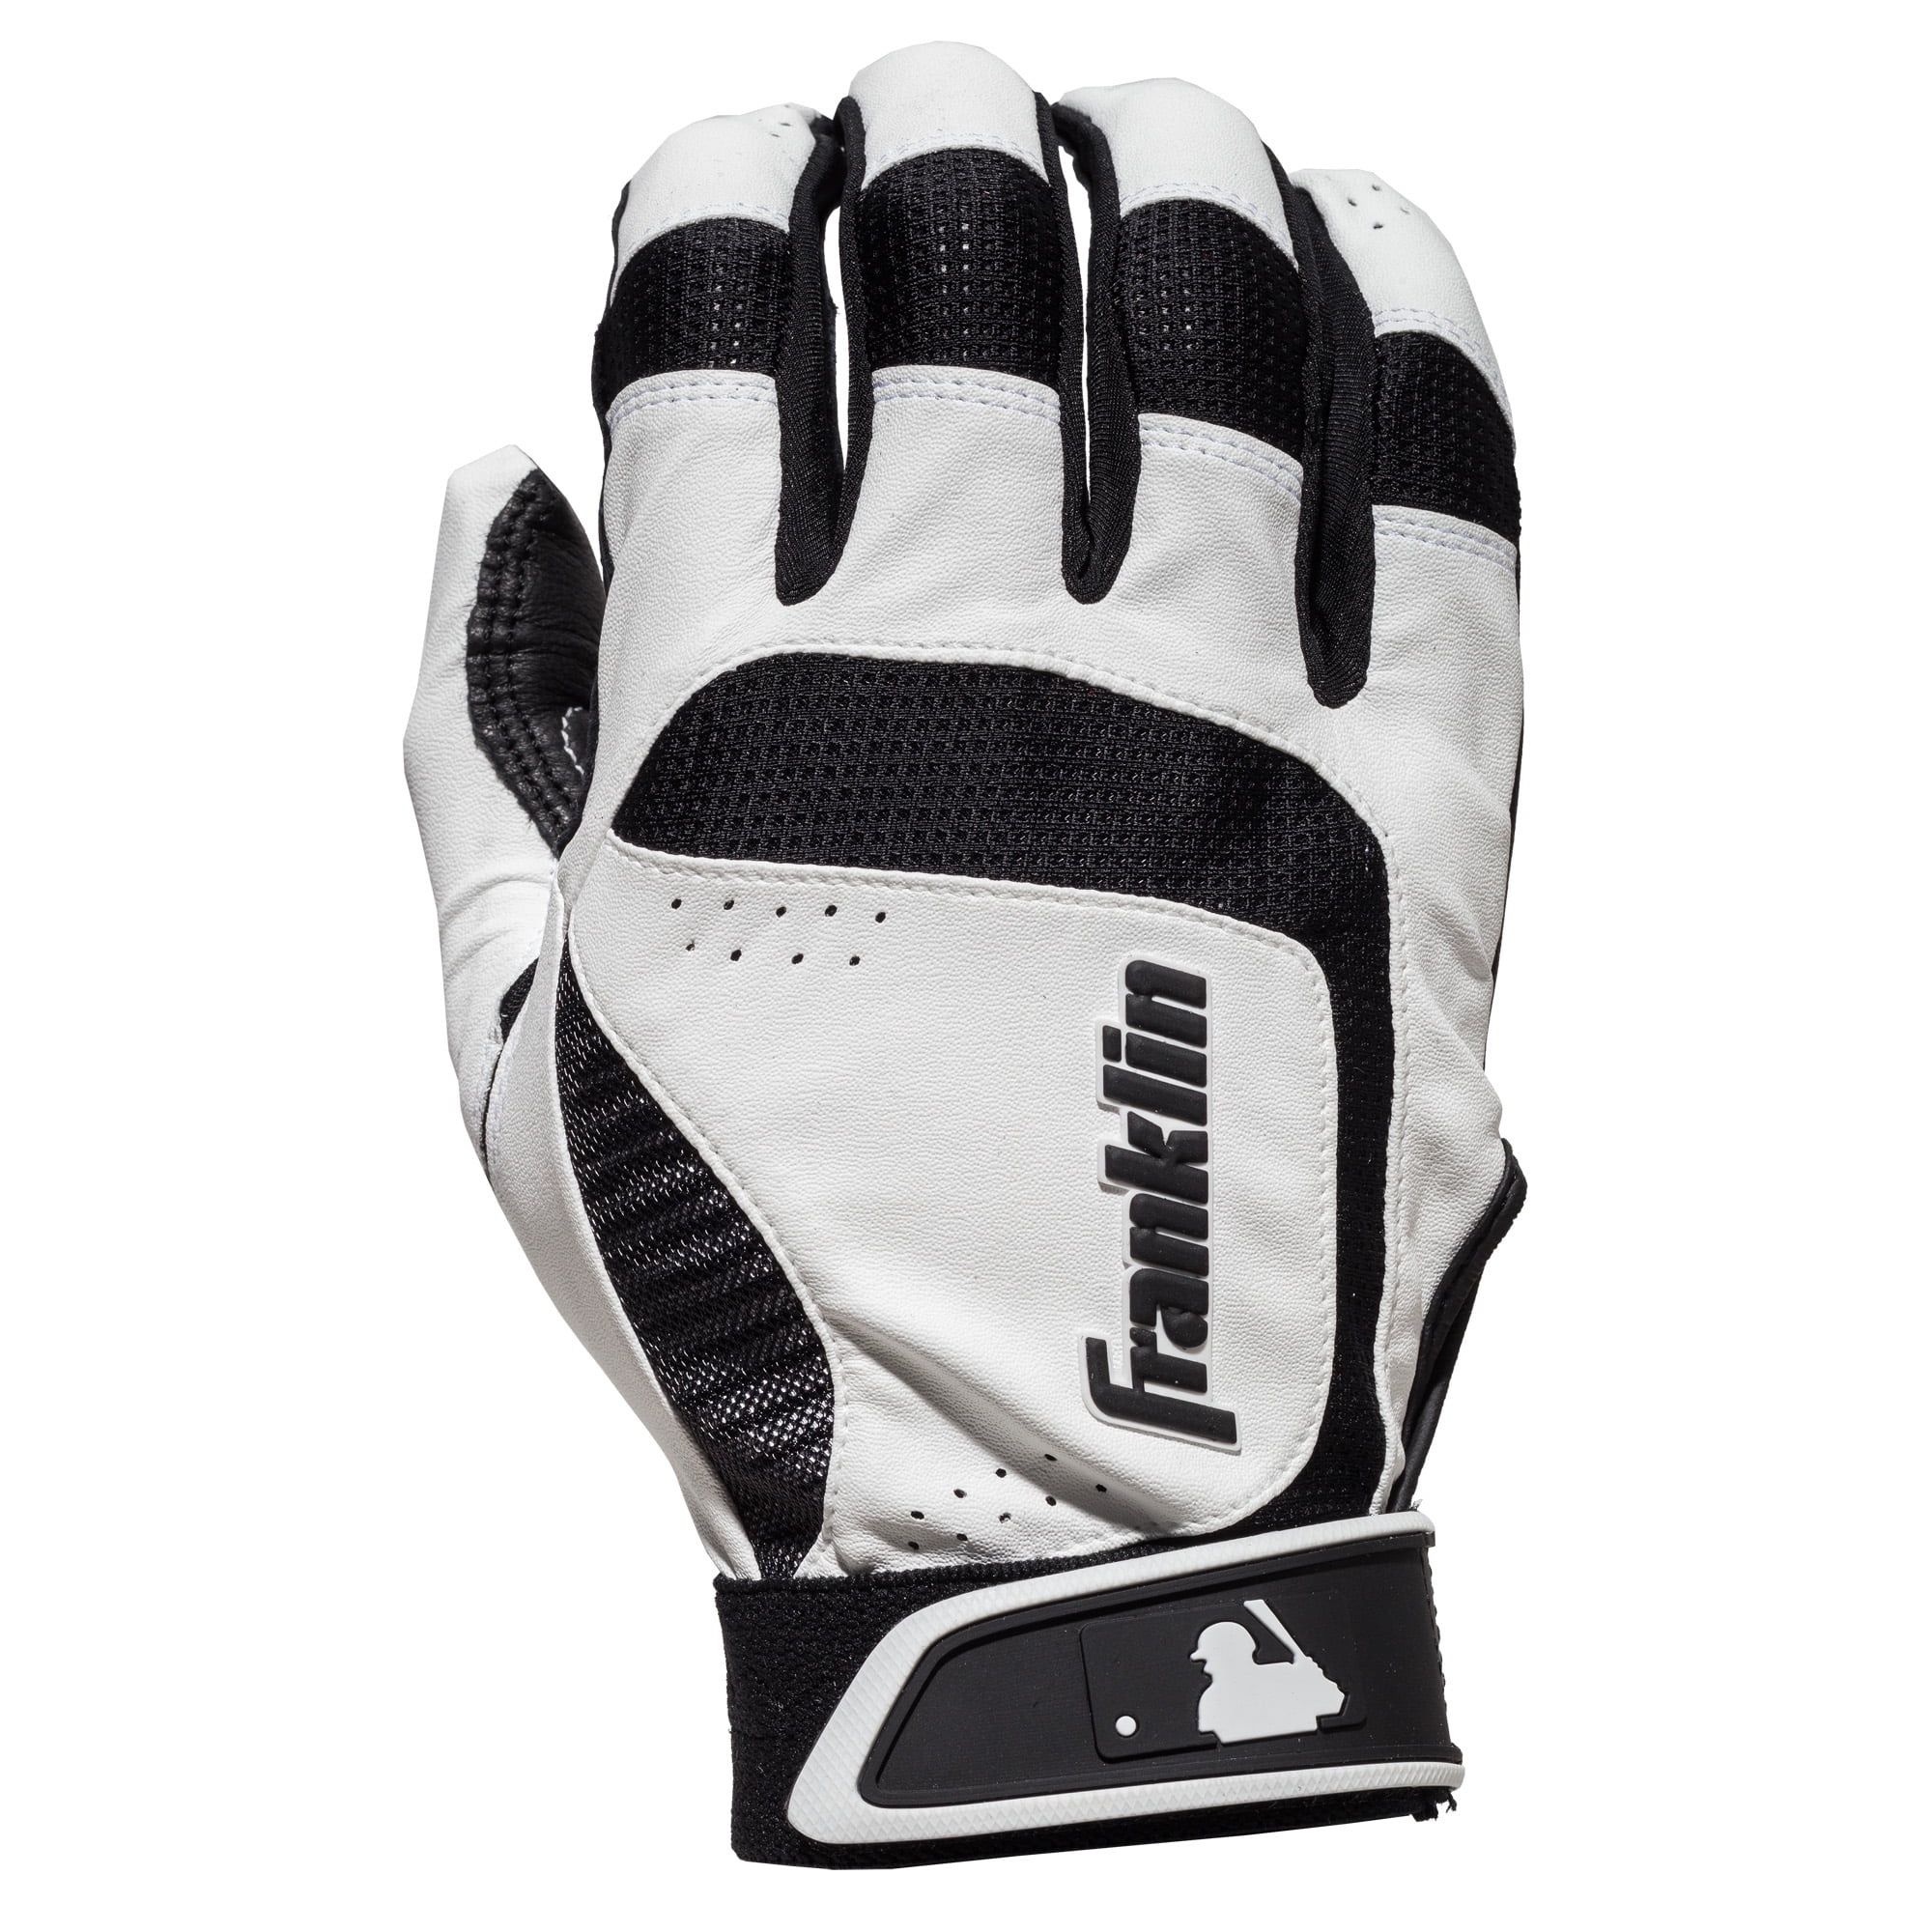 Details about   2nd Skinz XT Franklin Batting Glove Adult Small Brand New Black and White 